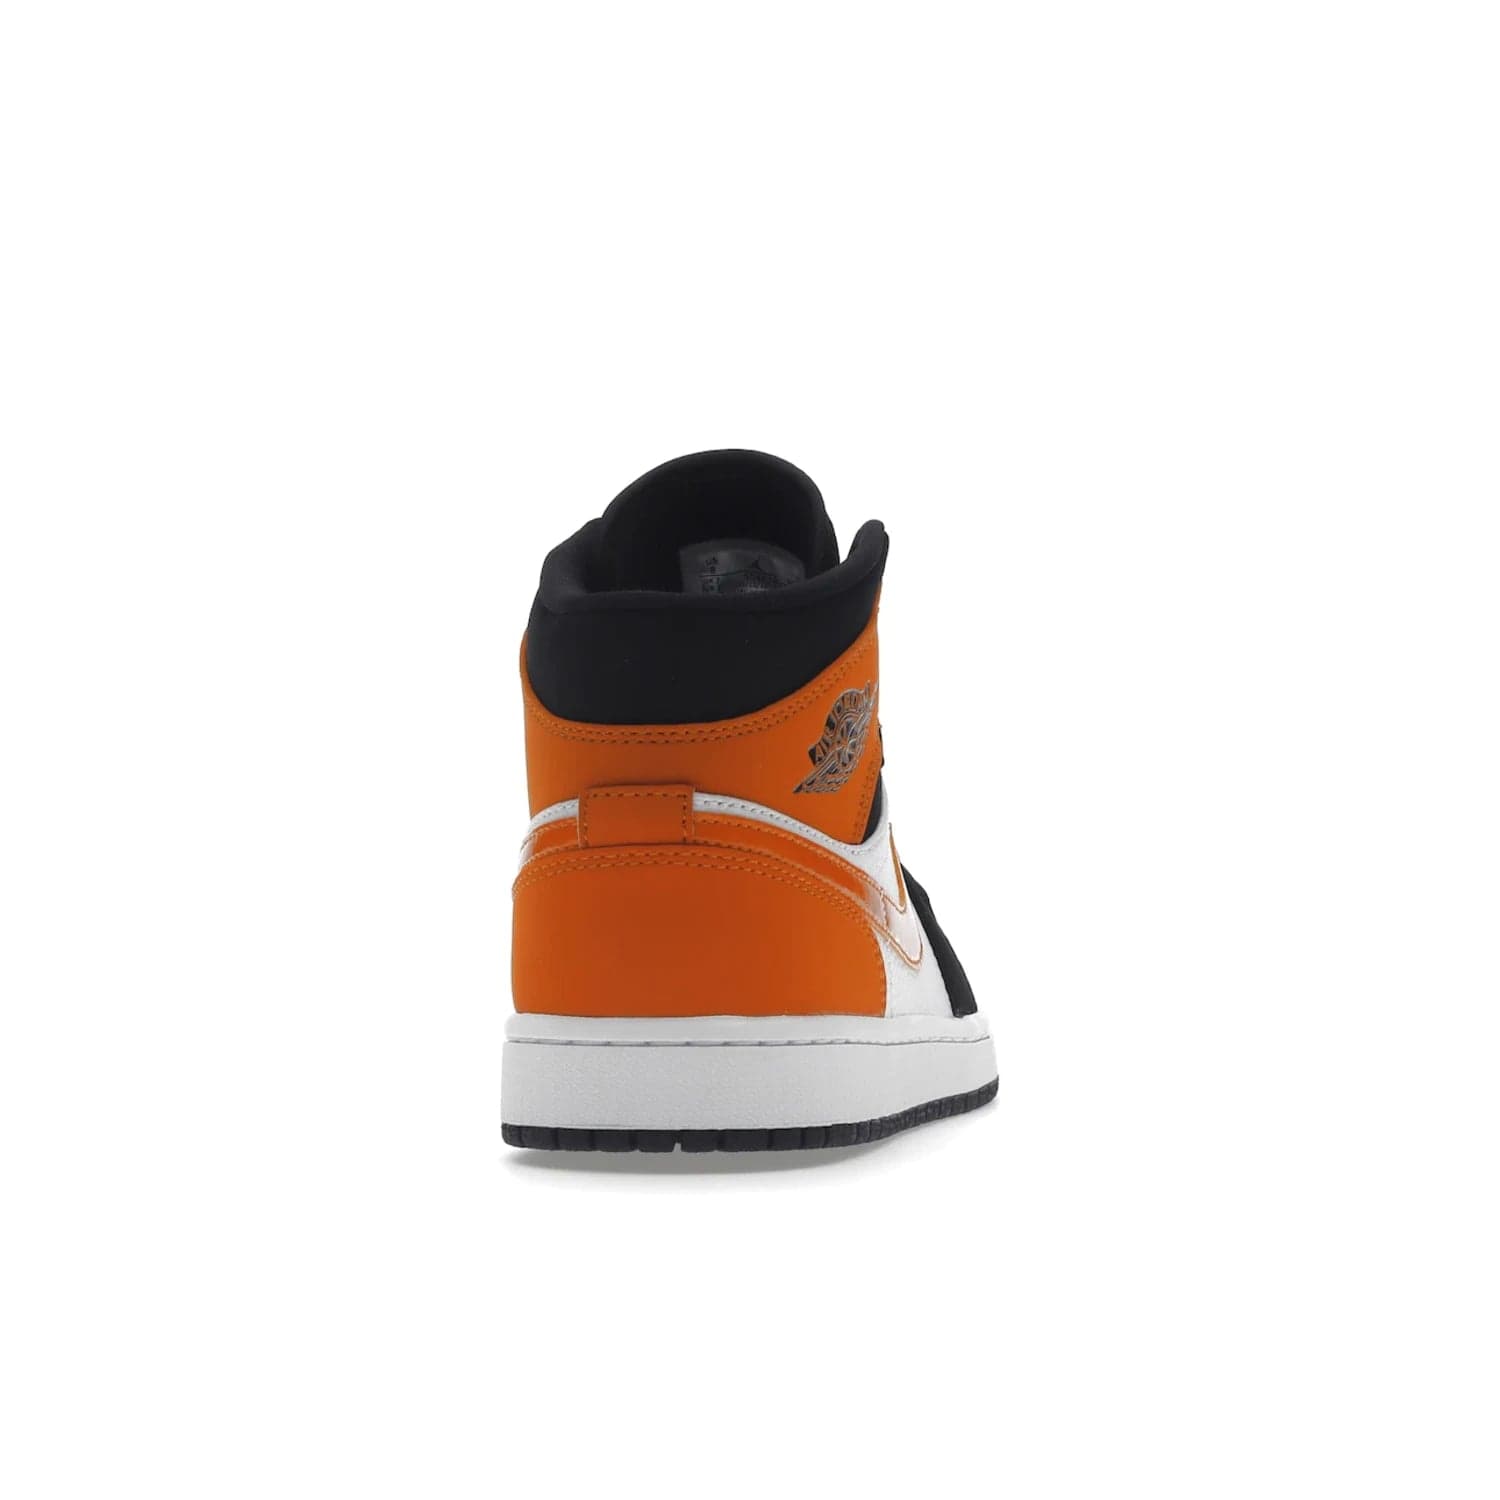 Jordan 1 Mid Shattered Backboard - Image 29 - Only at www.BallersClubKickz.com - The Air Jordan 1 Mid Shattered Backboard offers a timeless Black/White-Starfish colorway. Classic Swoosh logo and AJ insignia plus a shatterd backboard graphic on the insole. Get your pair today!